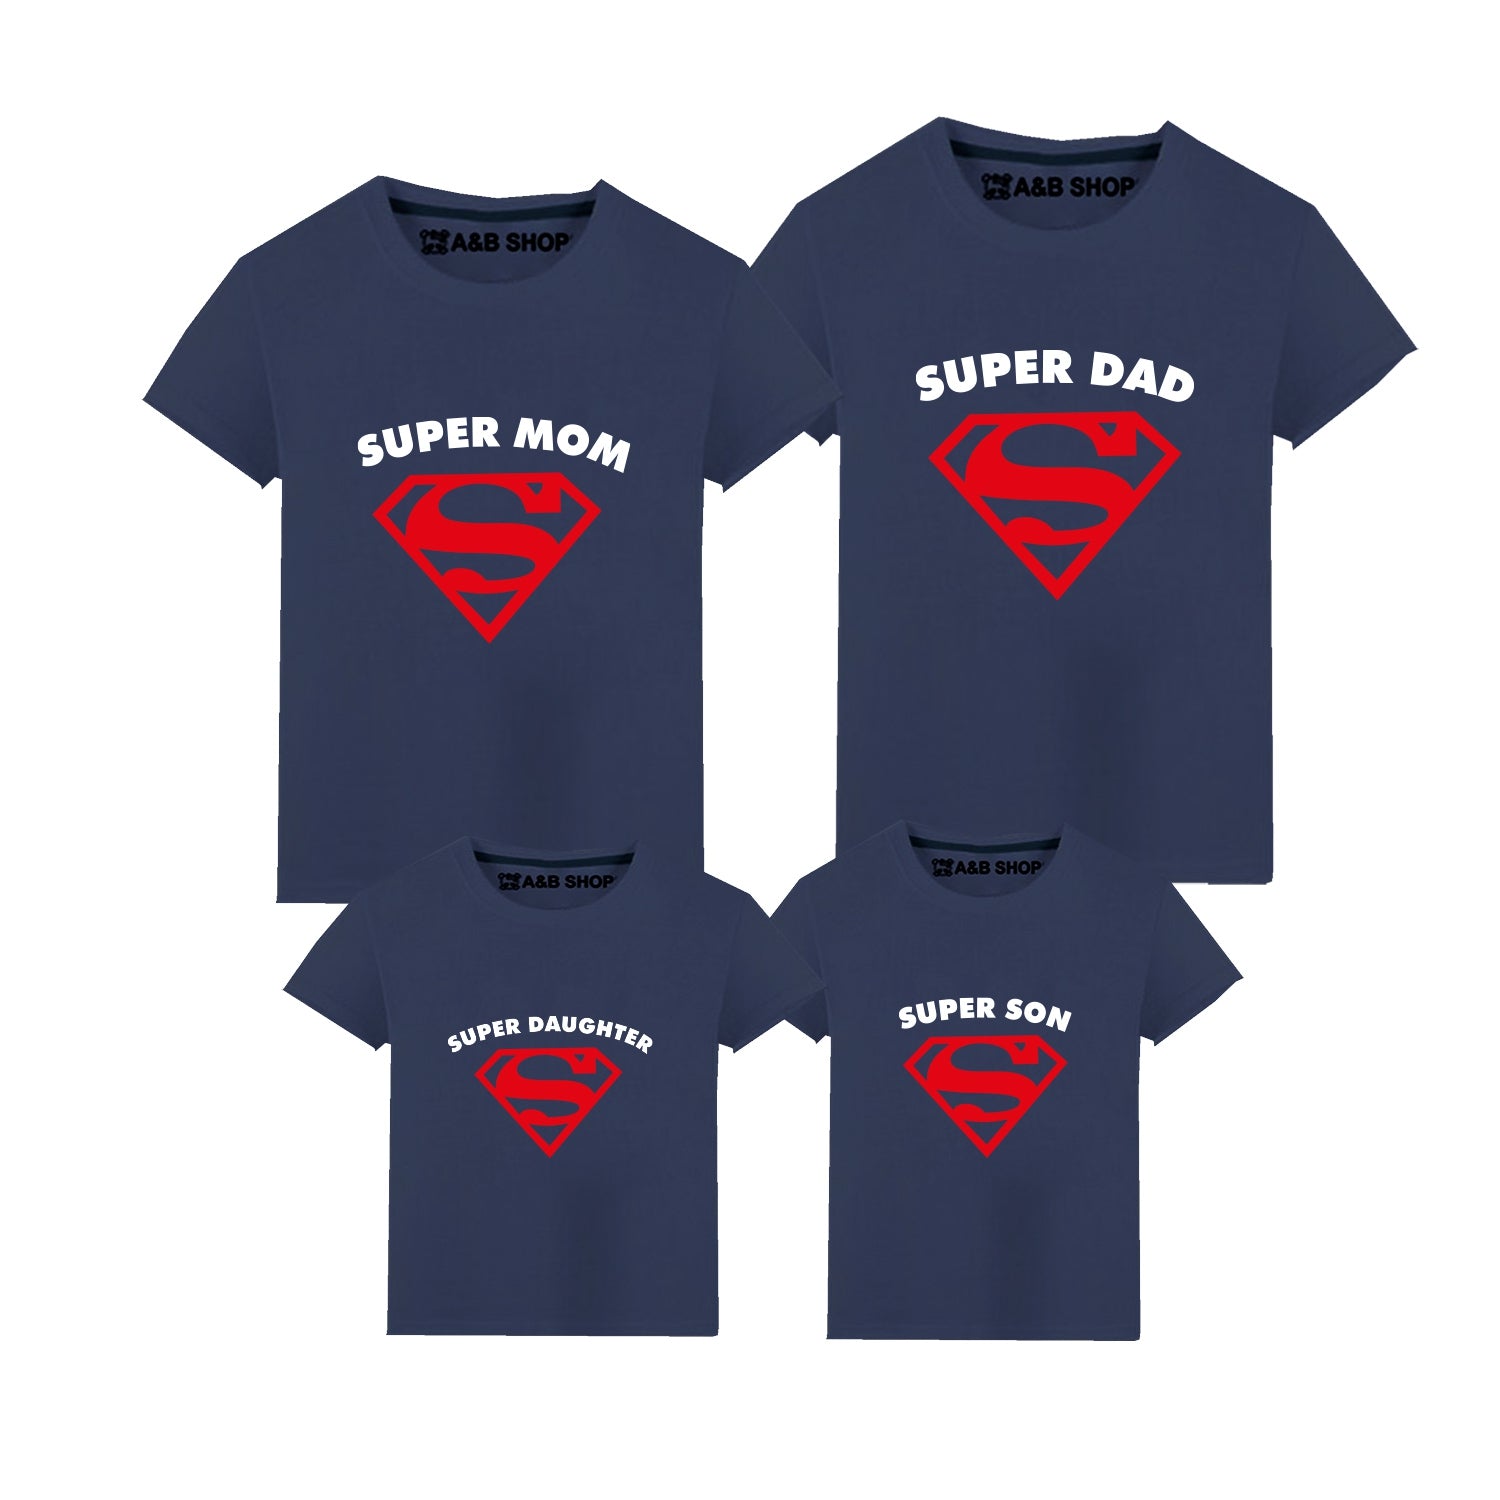 Superity T -shirt, Mom and Children